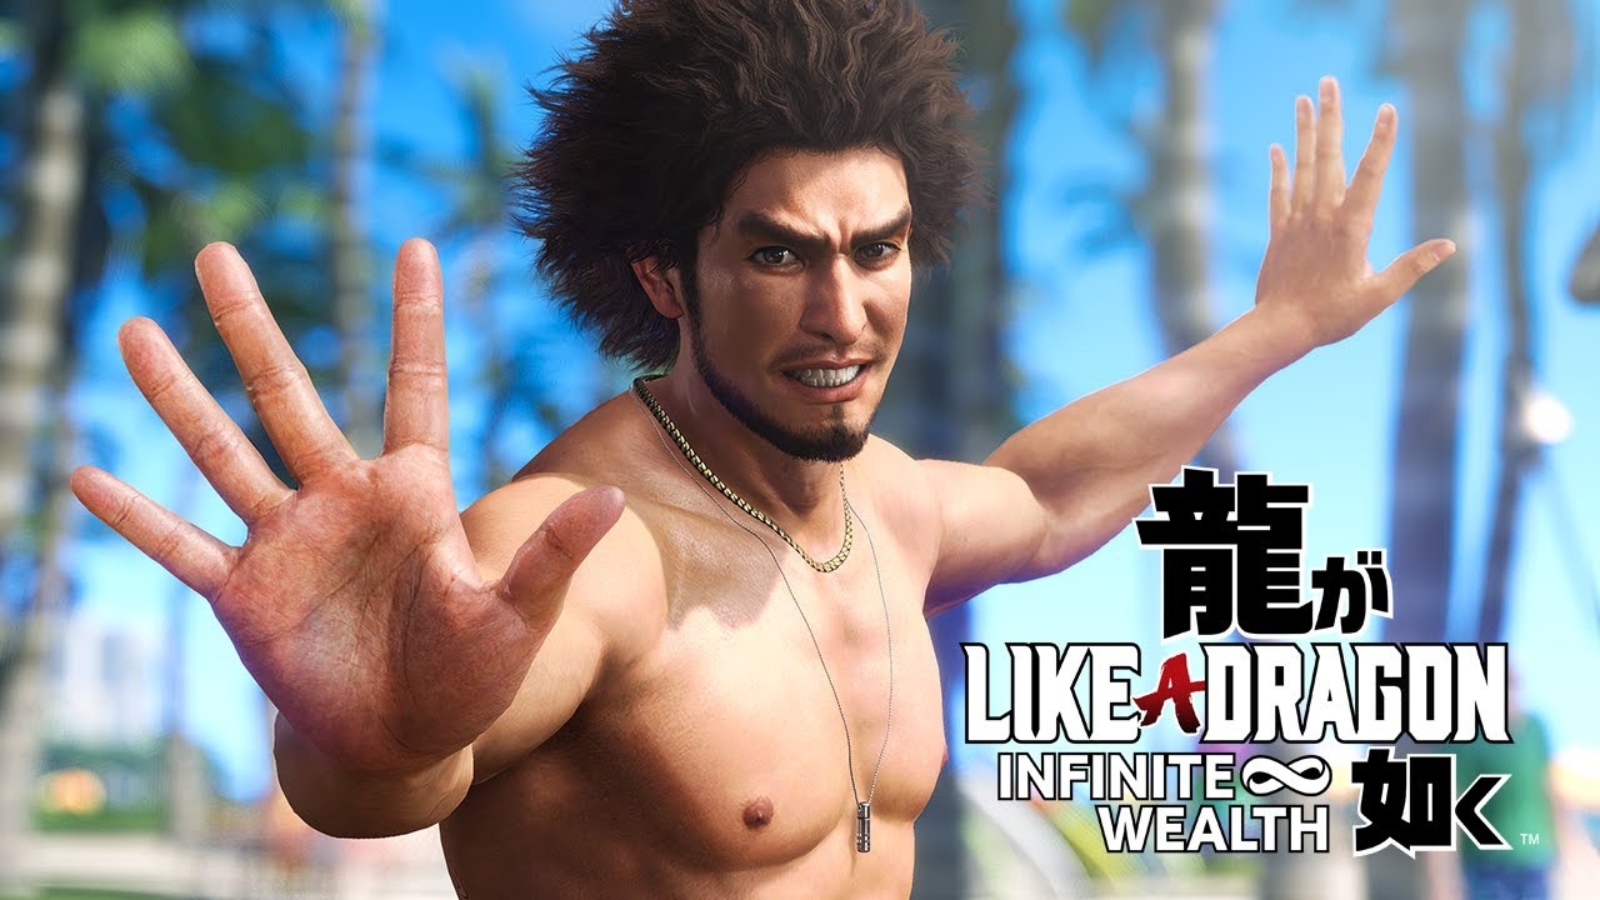 Yakuza players furious as New Game+ locked behind paywall in new Like A  Dragon - Dexerto